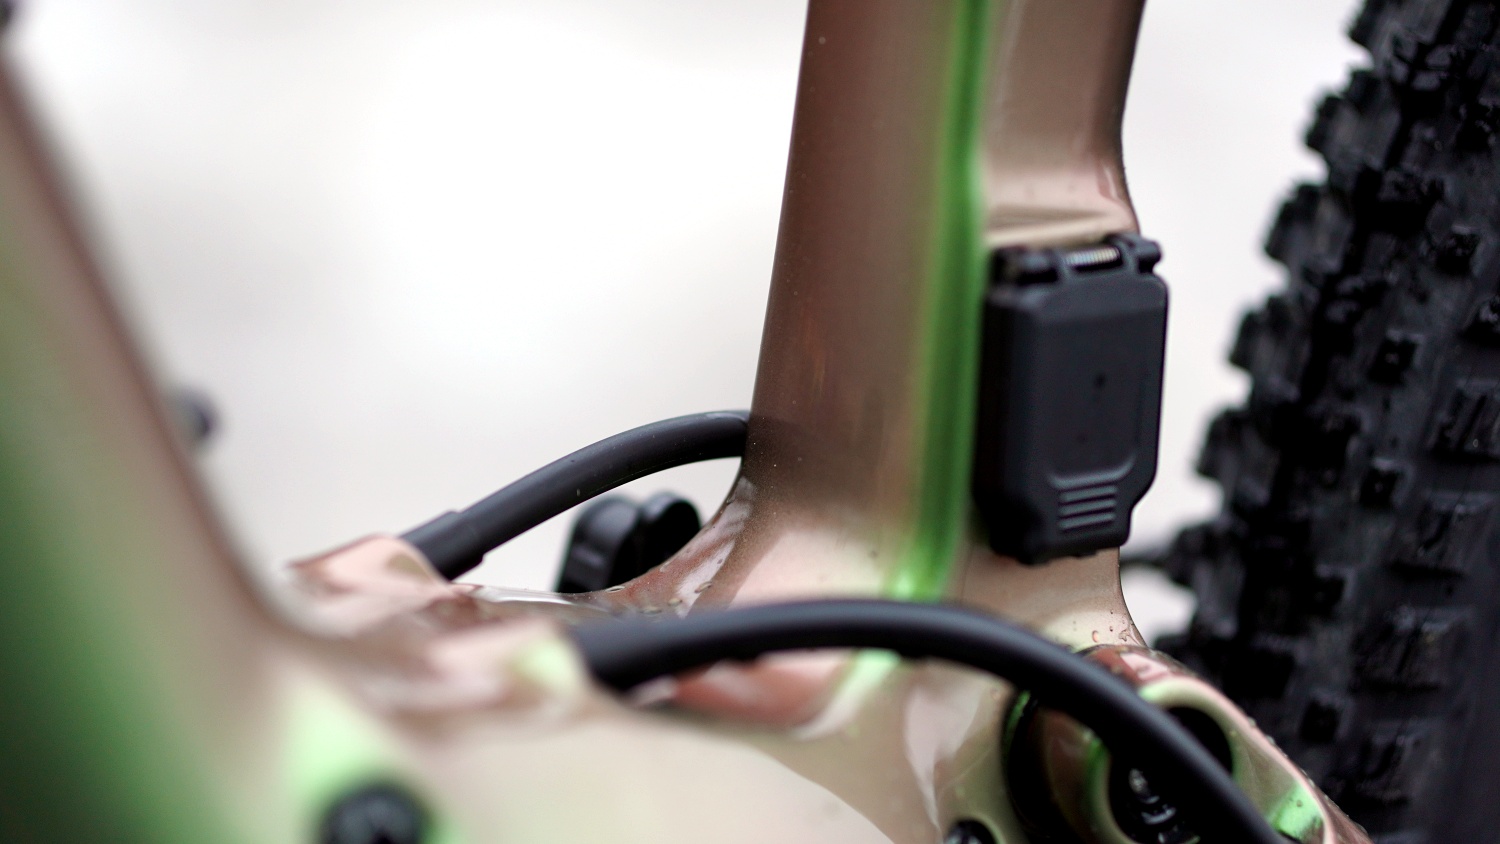 The Power button is no longer on the bottom of the downtube. The chargeport is though, it's new and easier to operate!